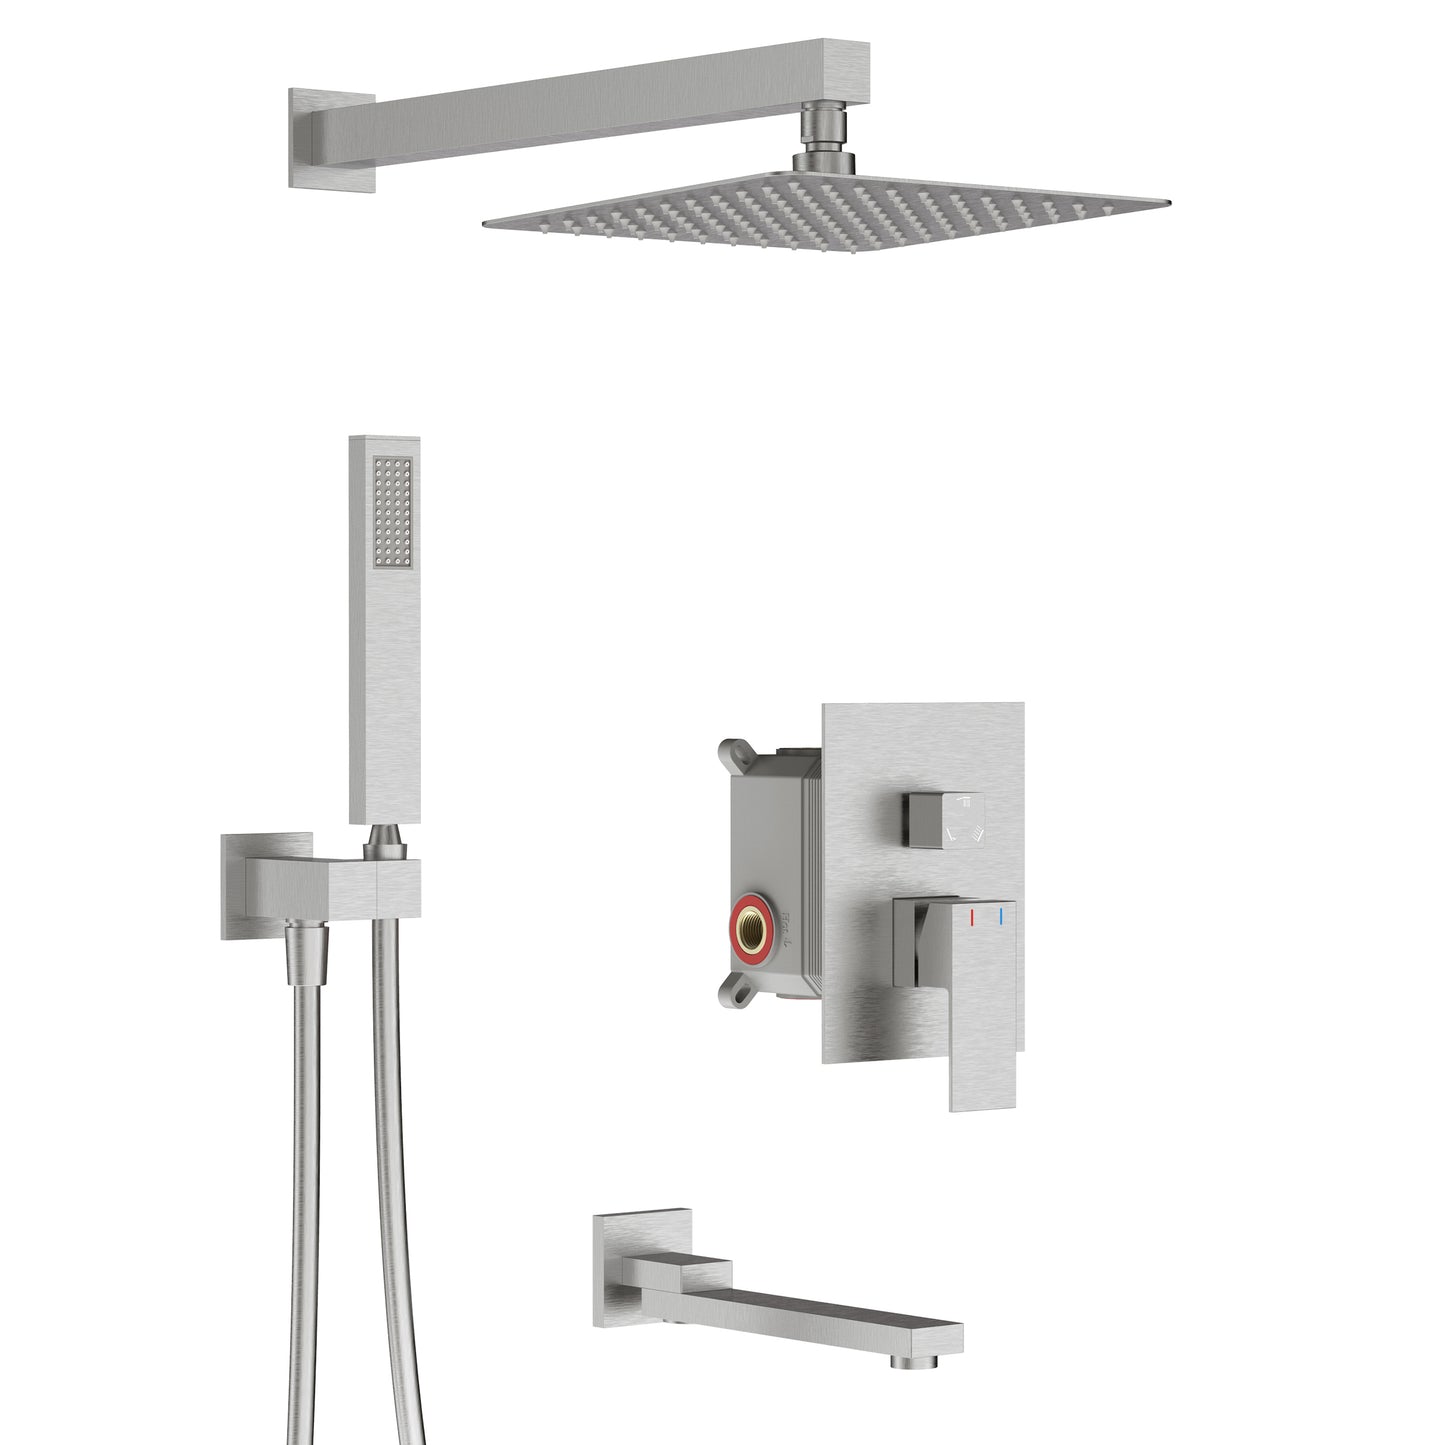 Shower System, Ultra-thin Wall Mounted Shower Faucet Set for Bathroom, Stainless Steel Rain Shower head Handheld Shower Set, 12 inch square large panel, Brushed Nickel